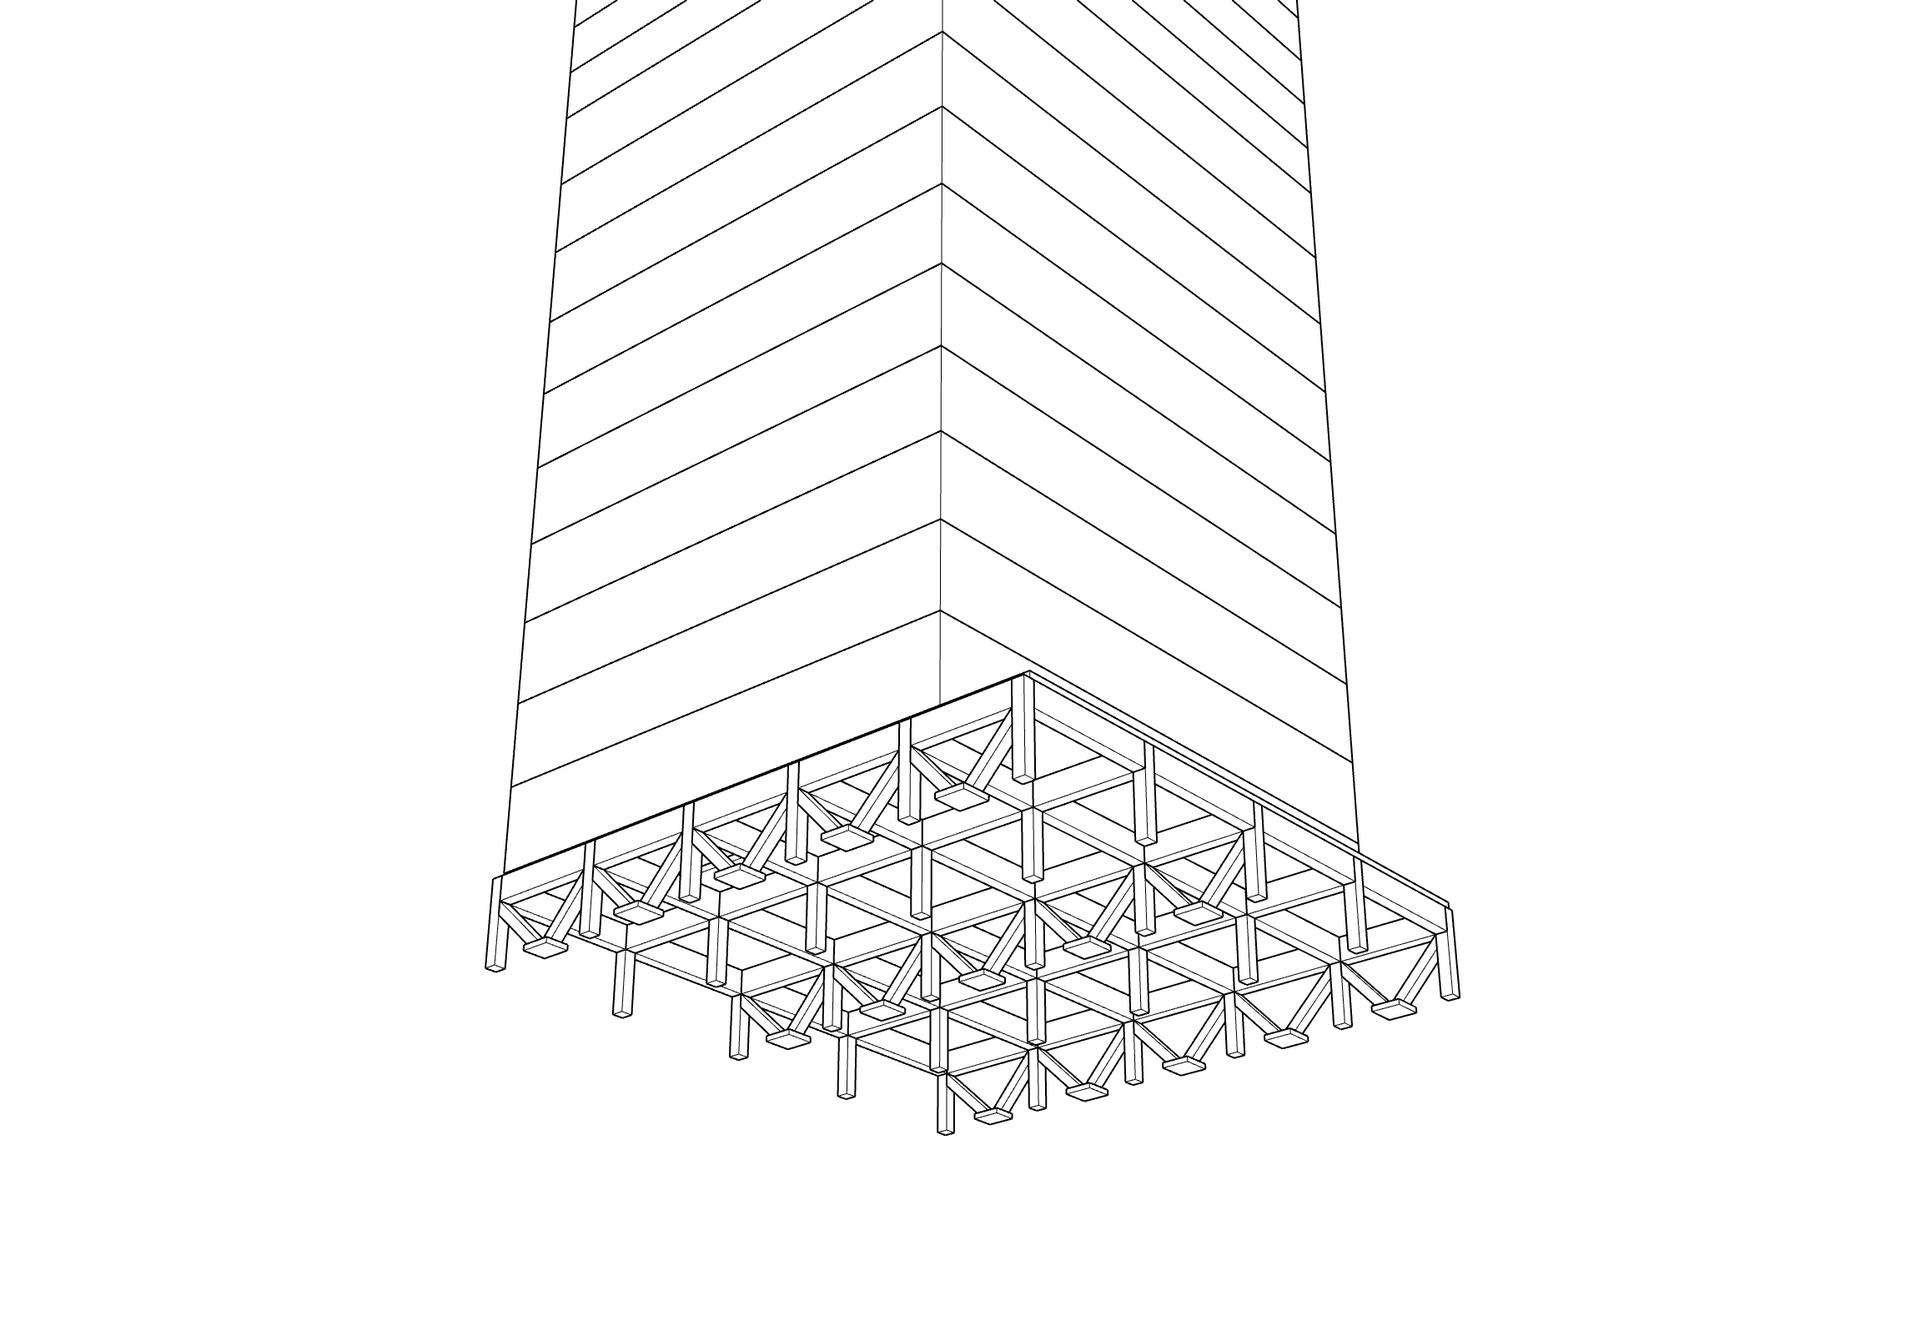 This shows an isometric worm's-eye view of a building raised on the proposed stilting system.